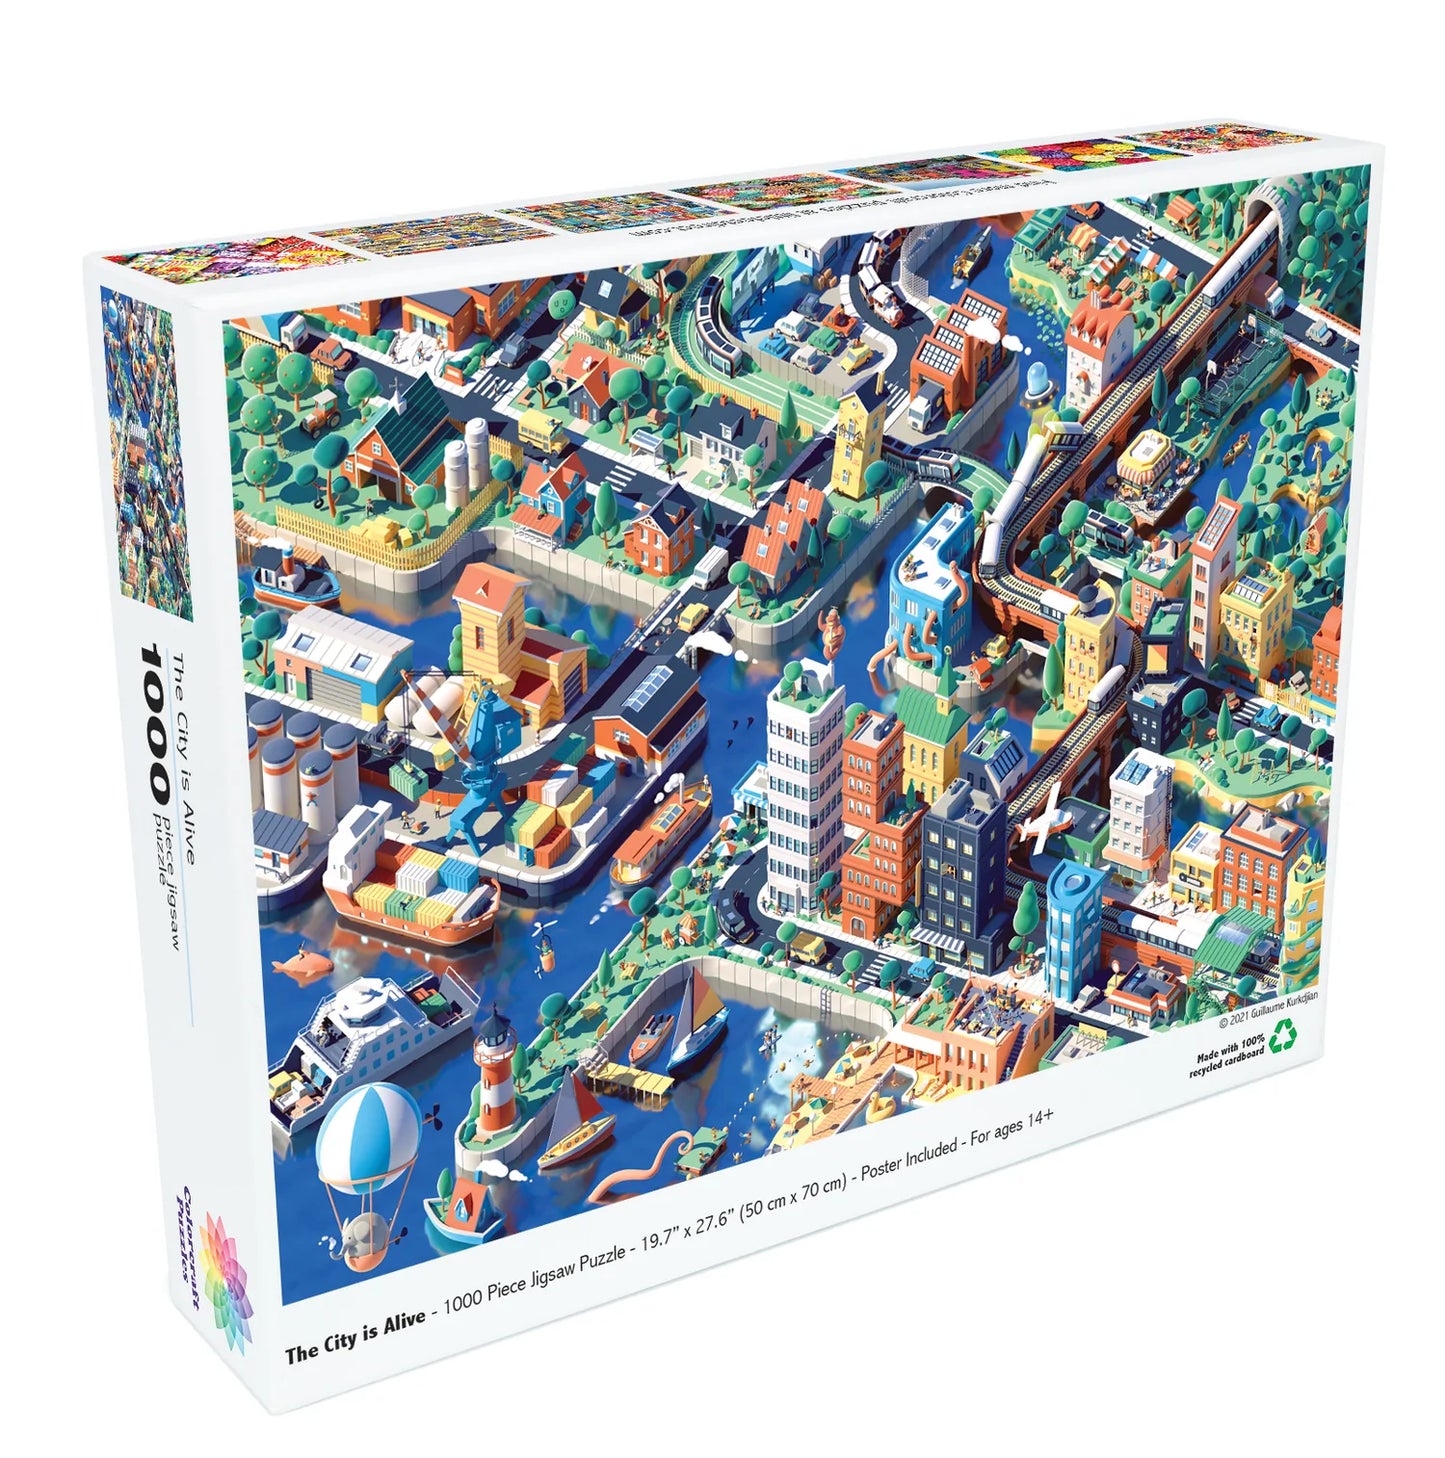 The City is Alive - 1000 Piece Jigsaw Puzzle